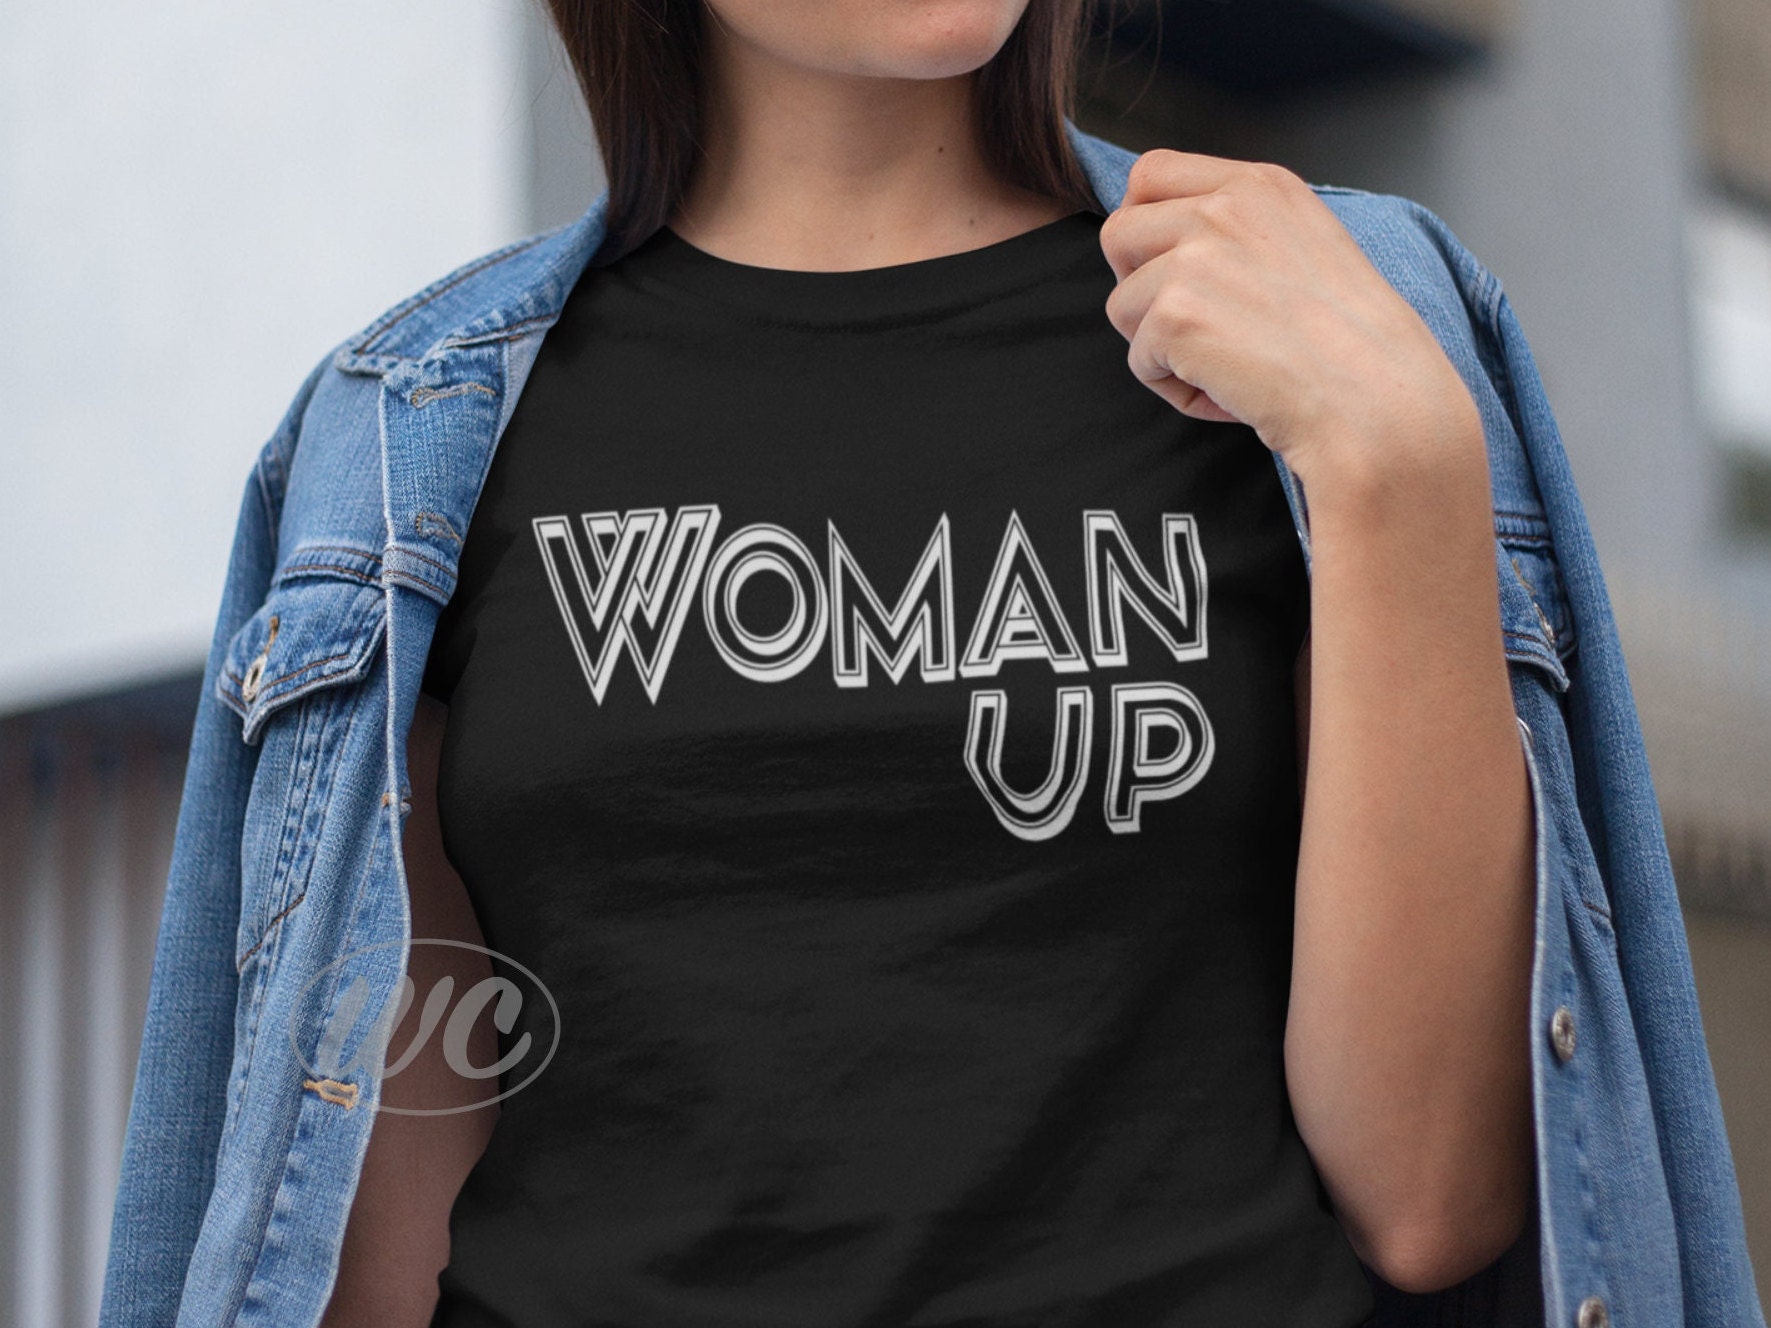 Discover WOMAN UP T-shirt | Shirts for Women | Cute shirts for her | International Women's Day | Mother's Day gift | Empowerment tees | Gifts for mom